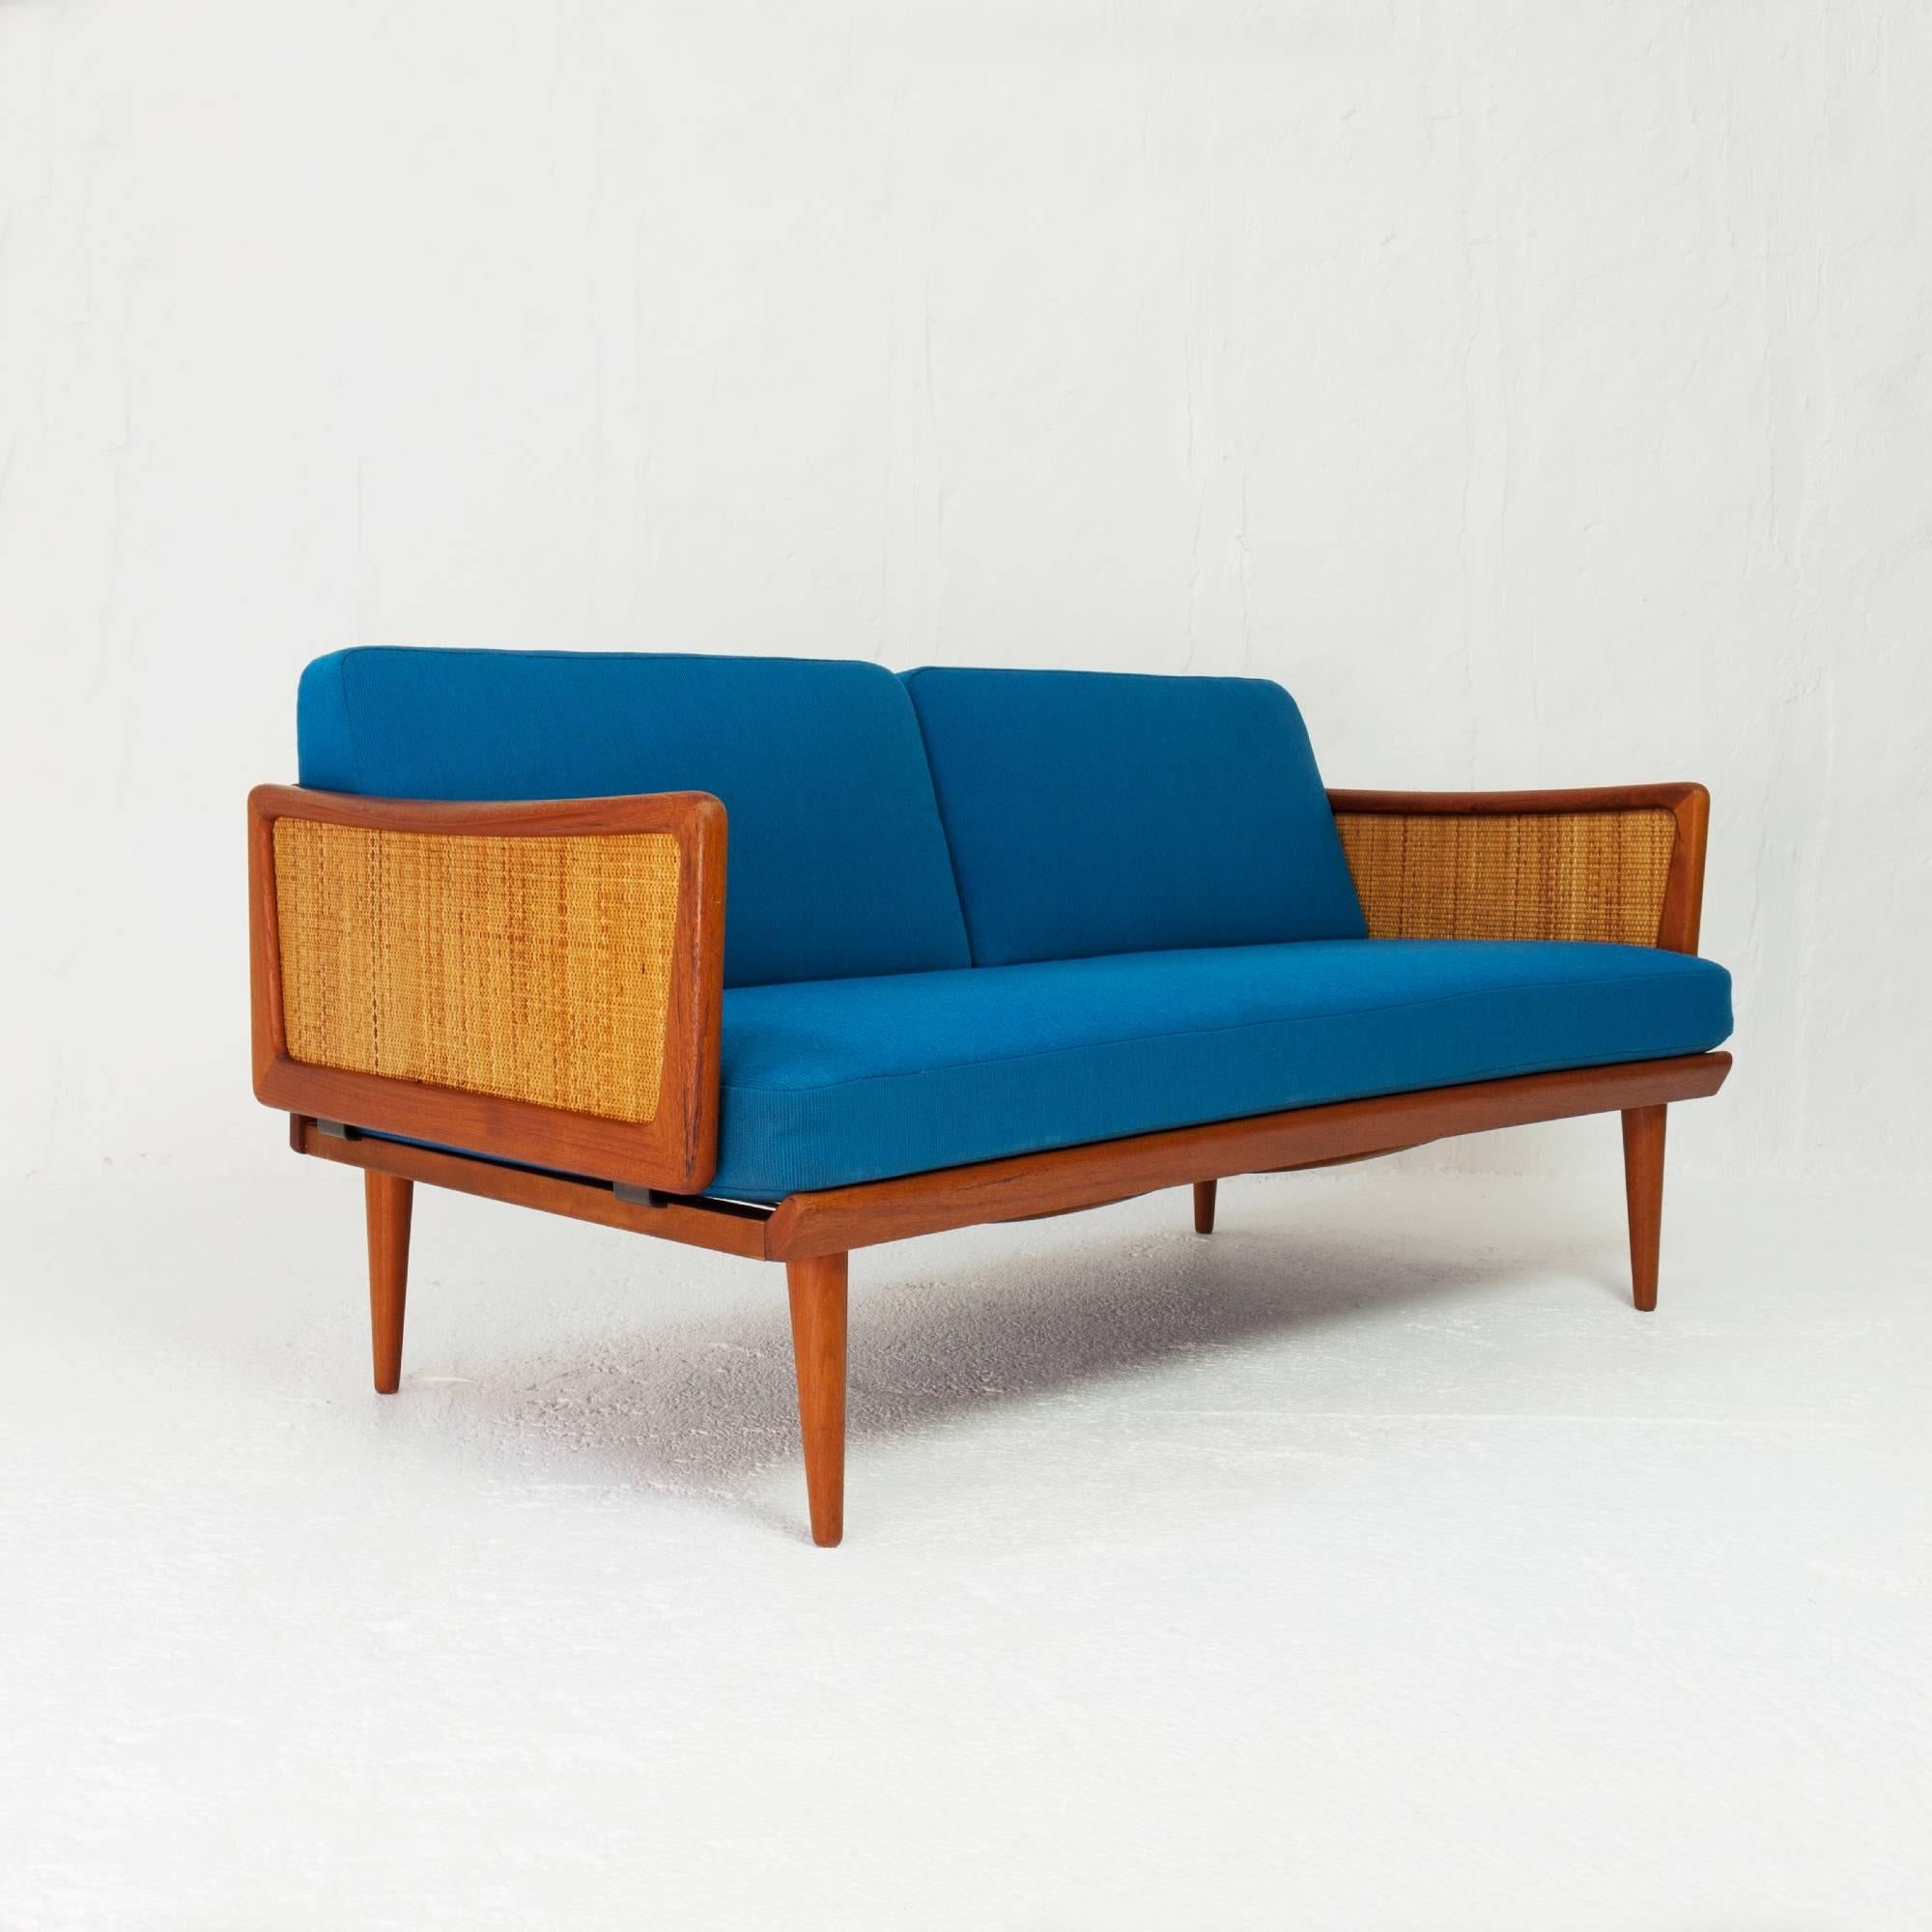 Rare sofa or daybed model FD 451 designed by Peter Hvidt & Orla Mølgaard Nielsen. Original upholstery. Produced by France & Daverkosen in Denmark with the early metal badge most likely 1950s up to 1957. Width open 225 cm.
Identified and listed by